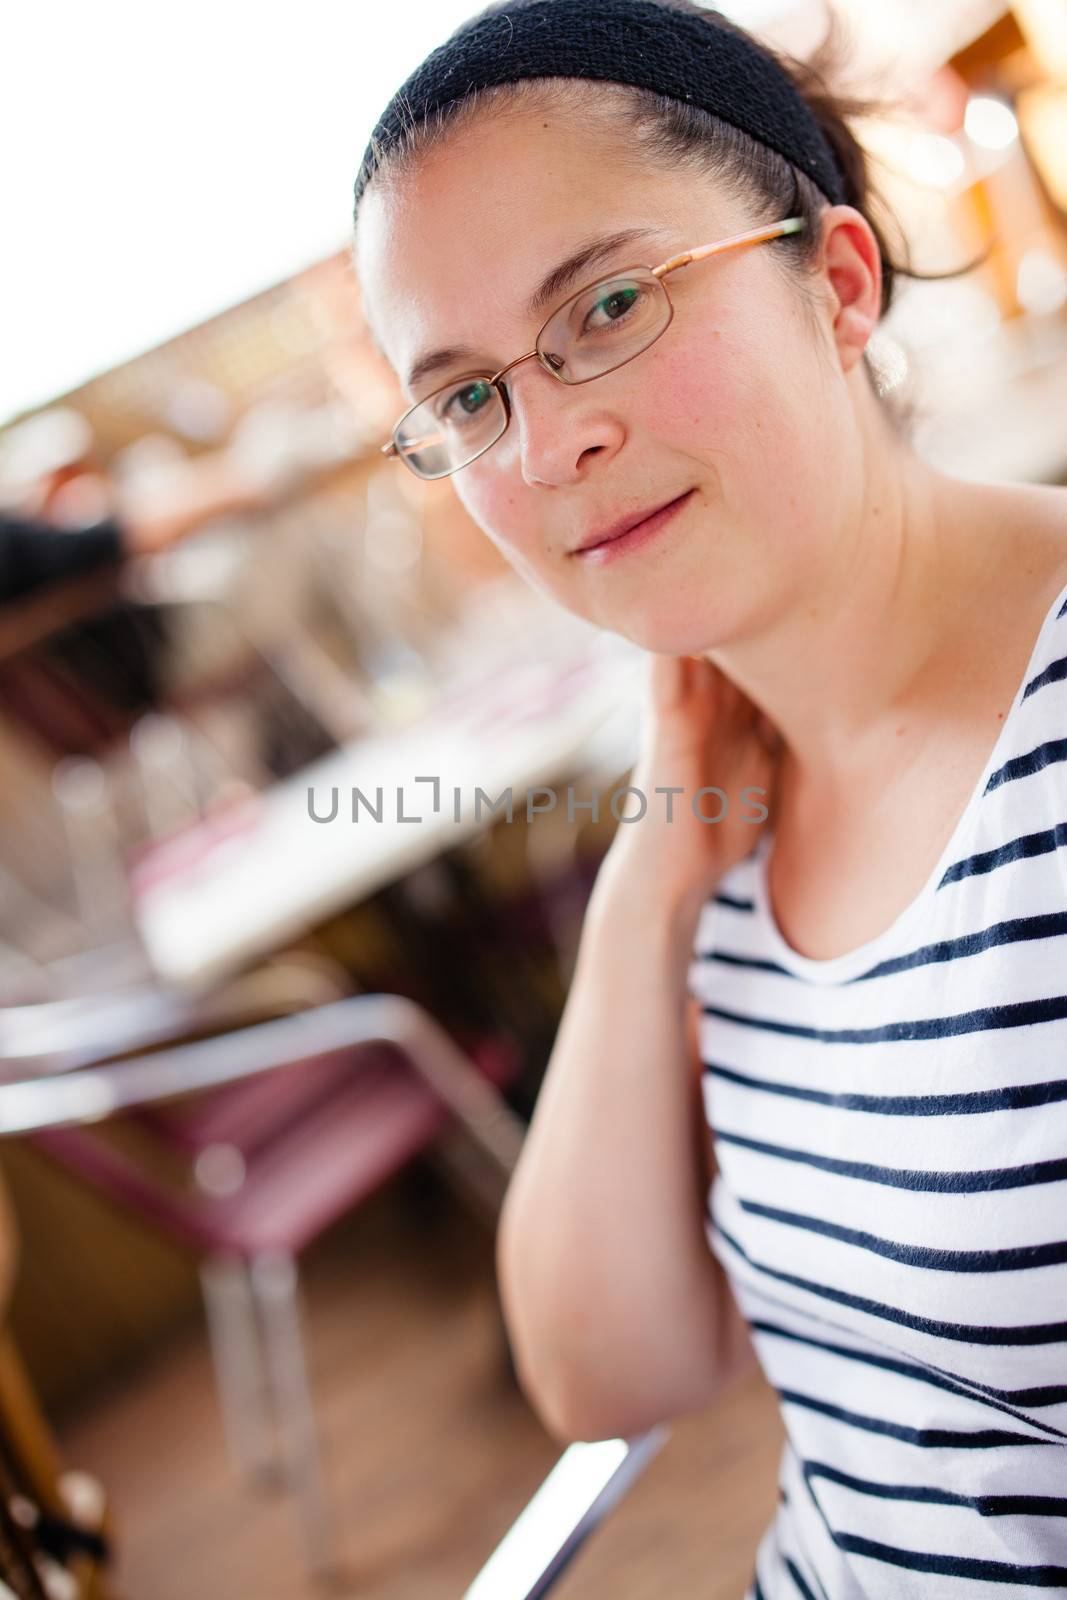 Woman at a restaurant by Talanis